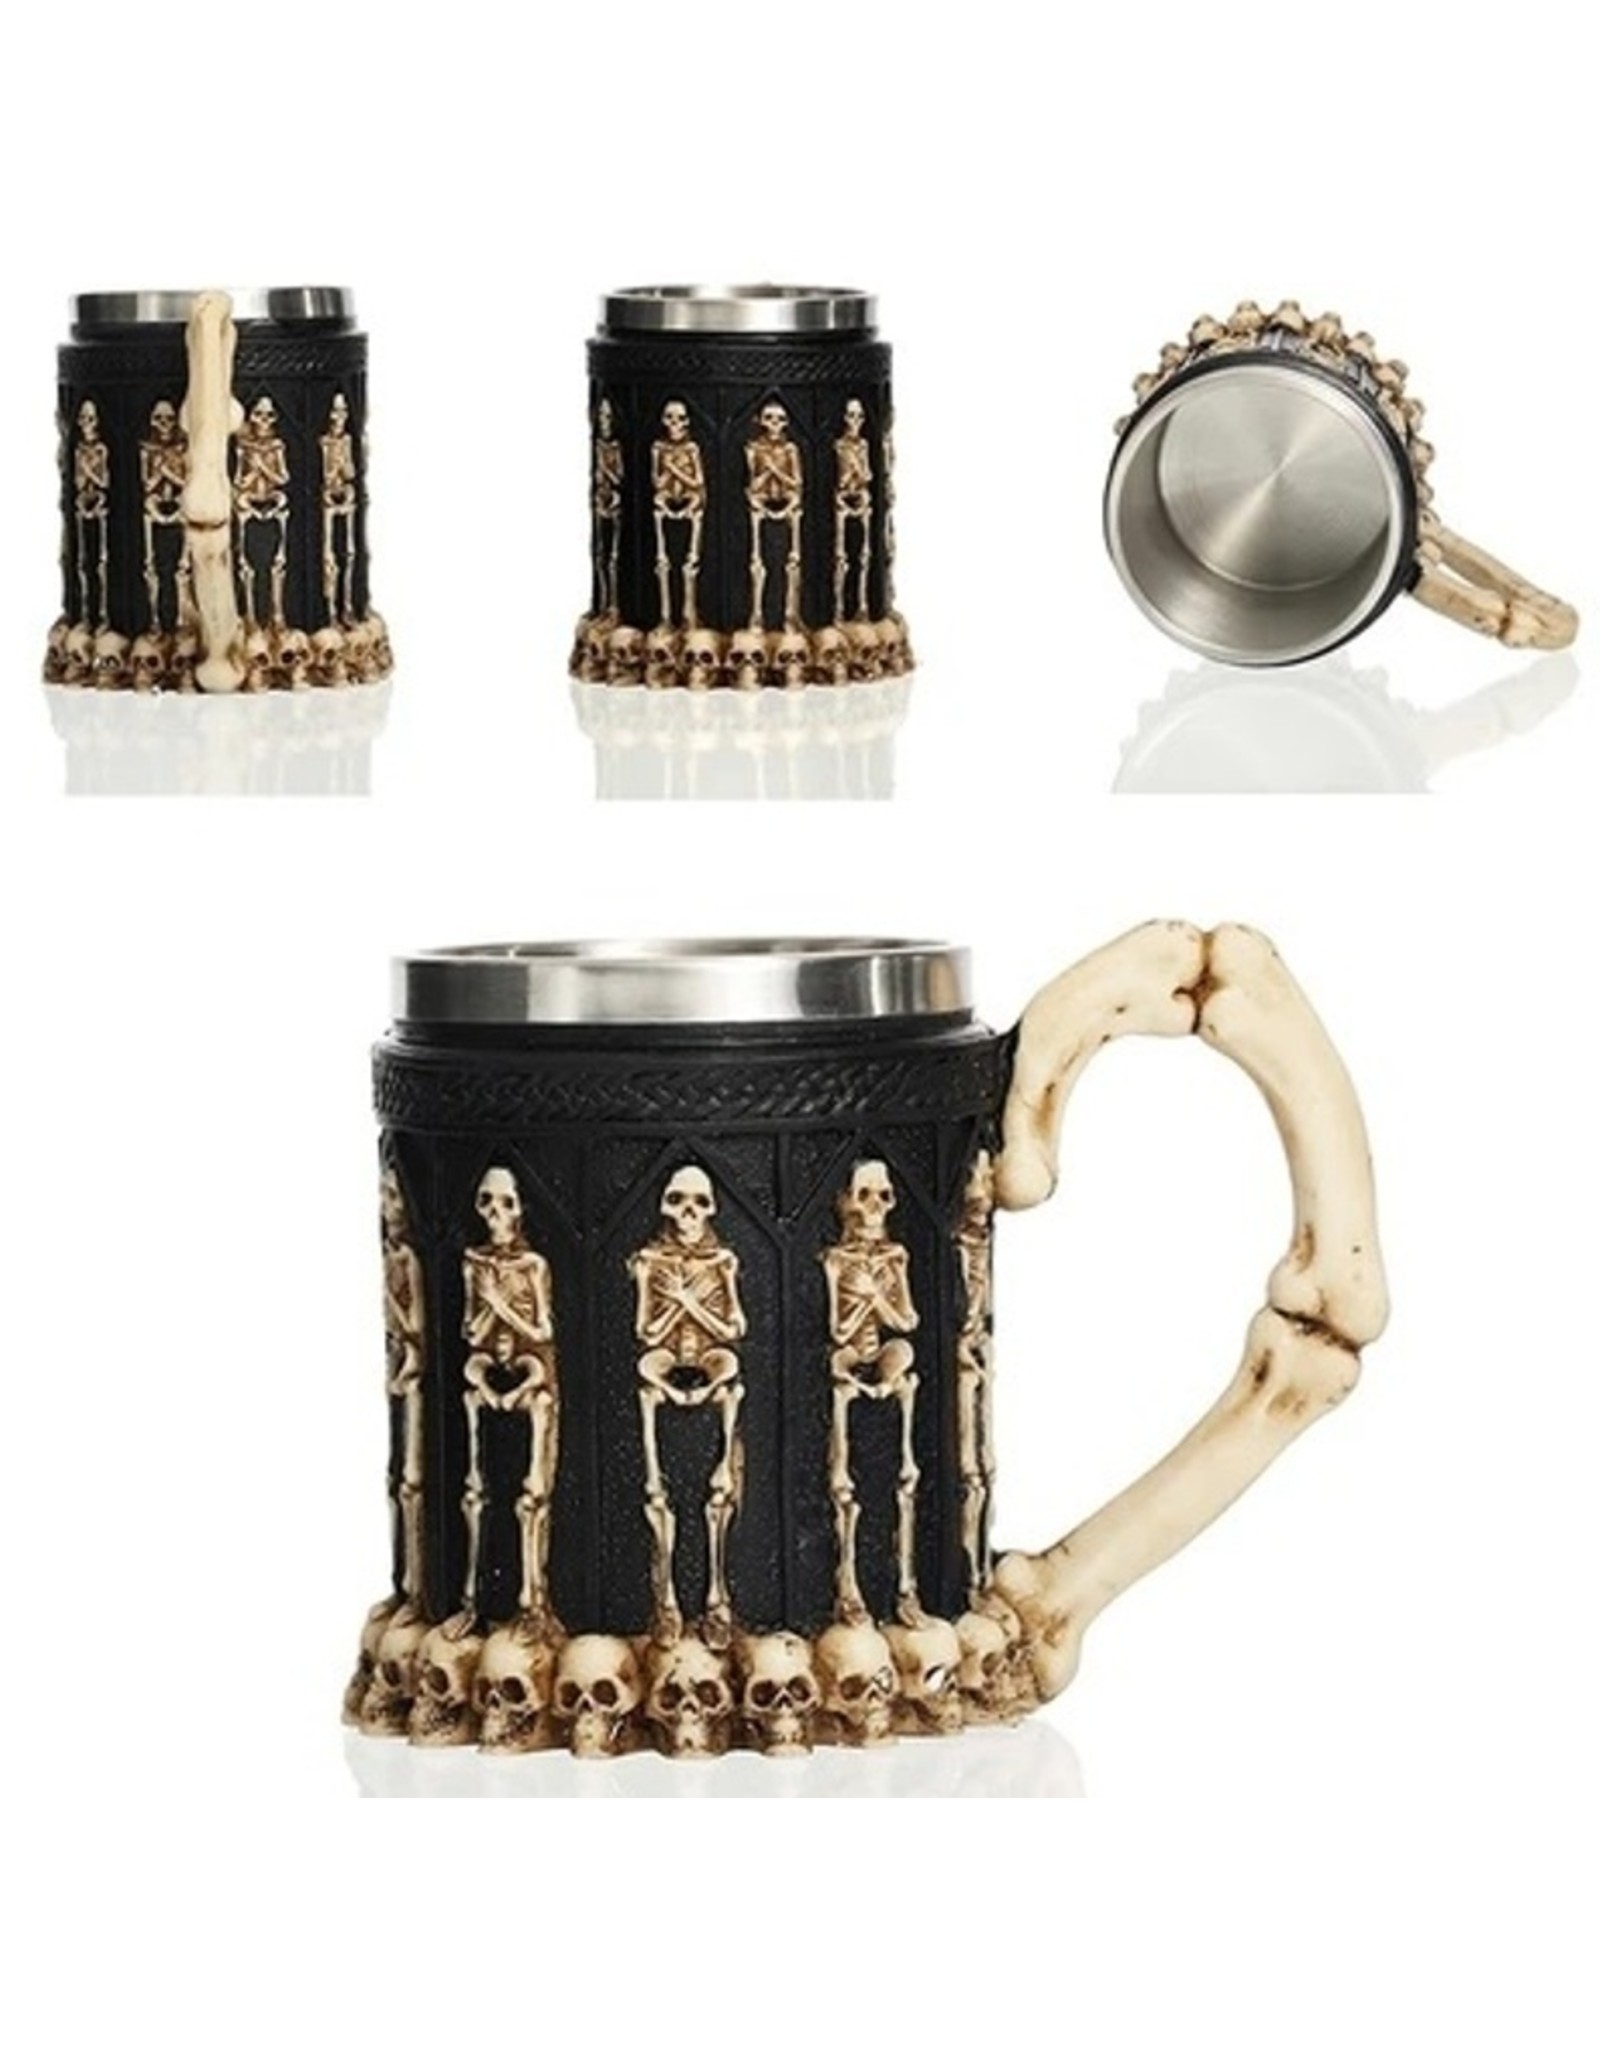 Dark Desire Tankards and Goblets - Gothic tankard with Skeletons